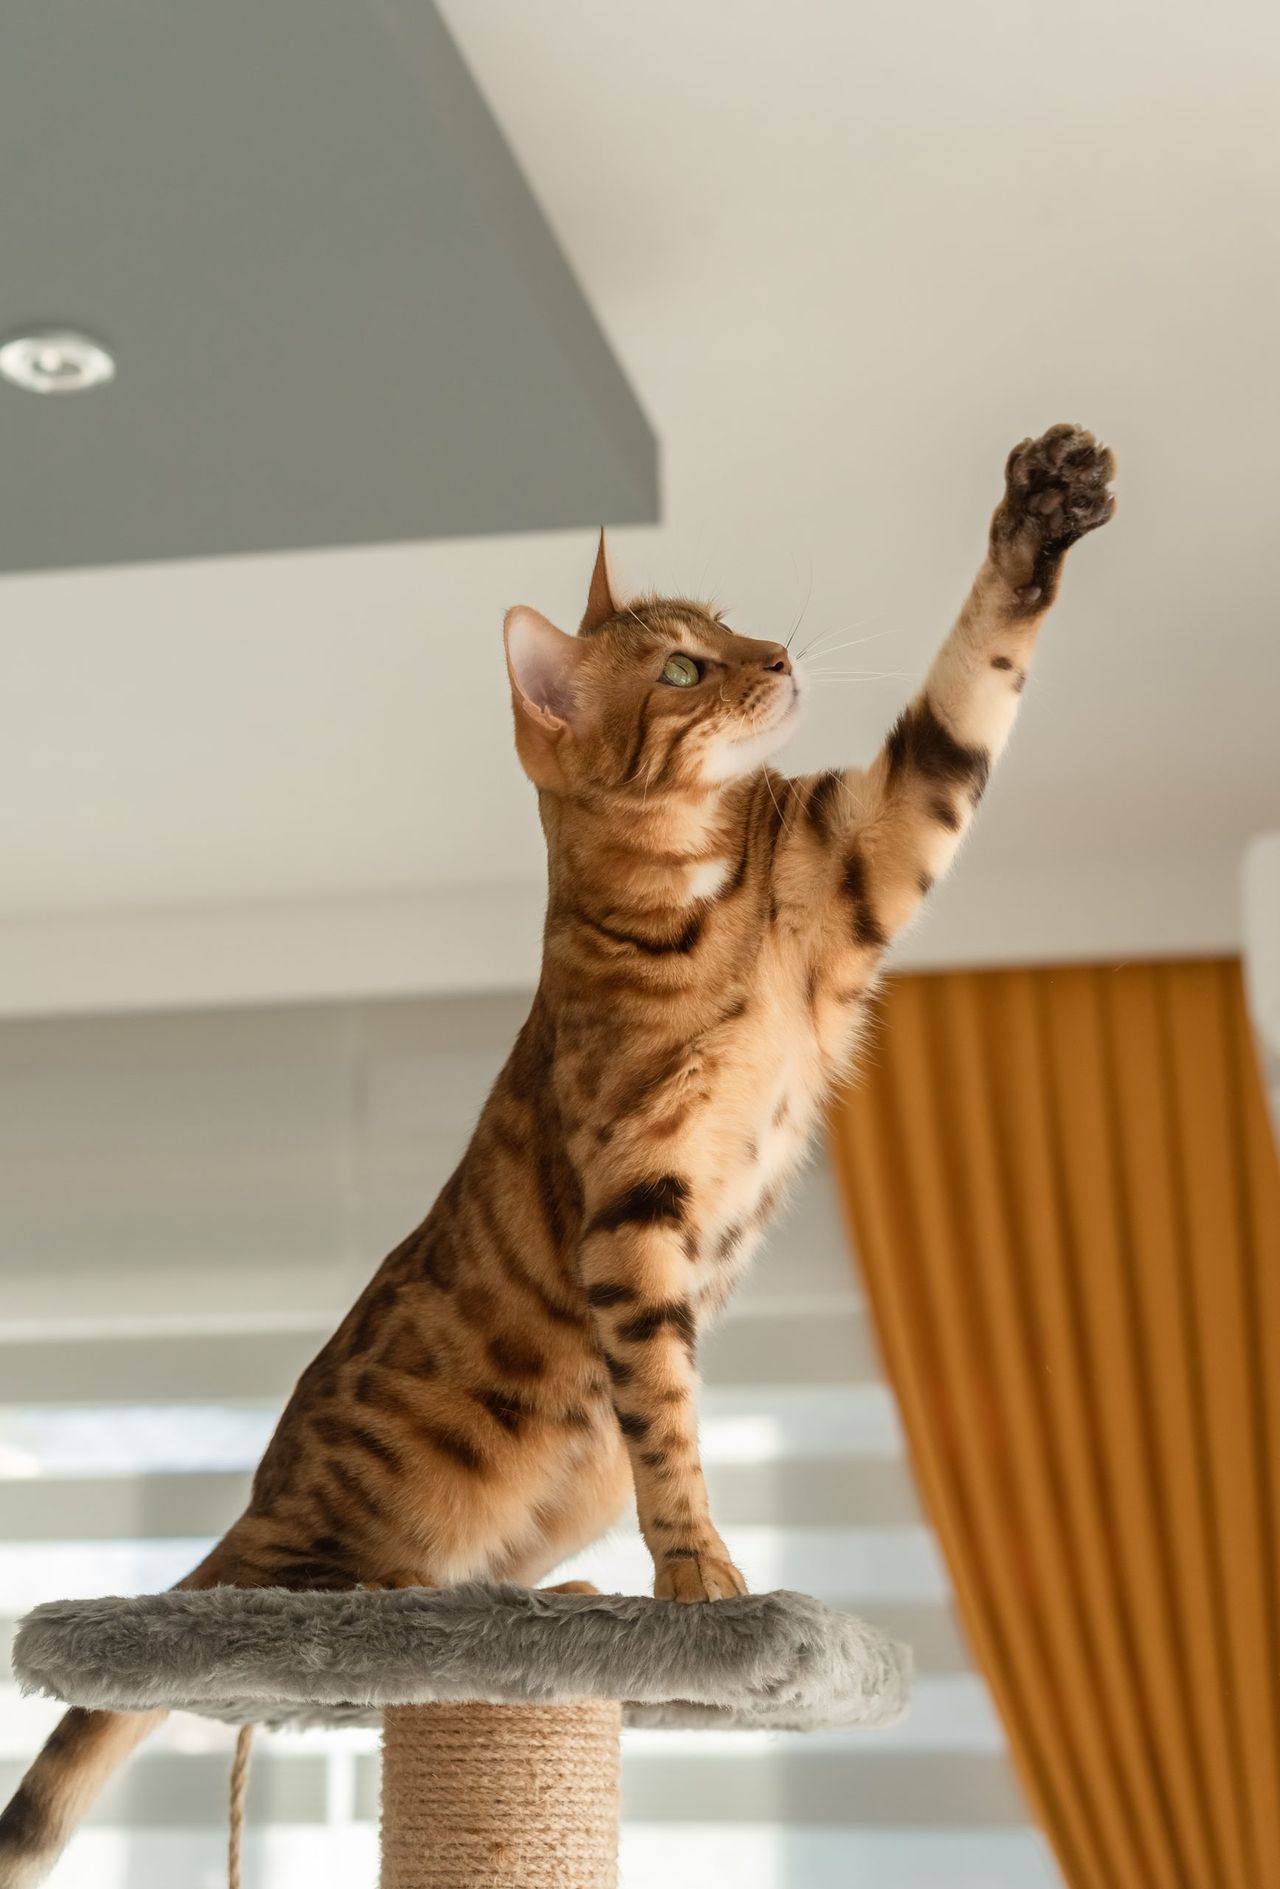 The Bengal cat sits on top of the scratching post and pulls its paw up.